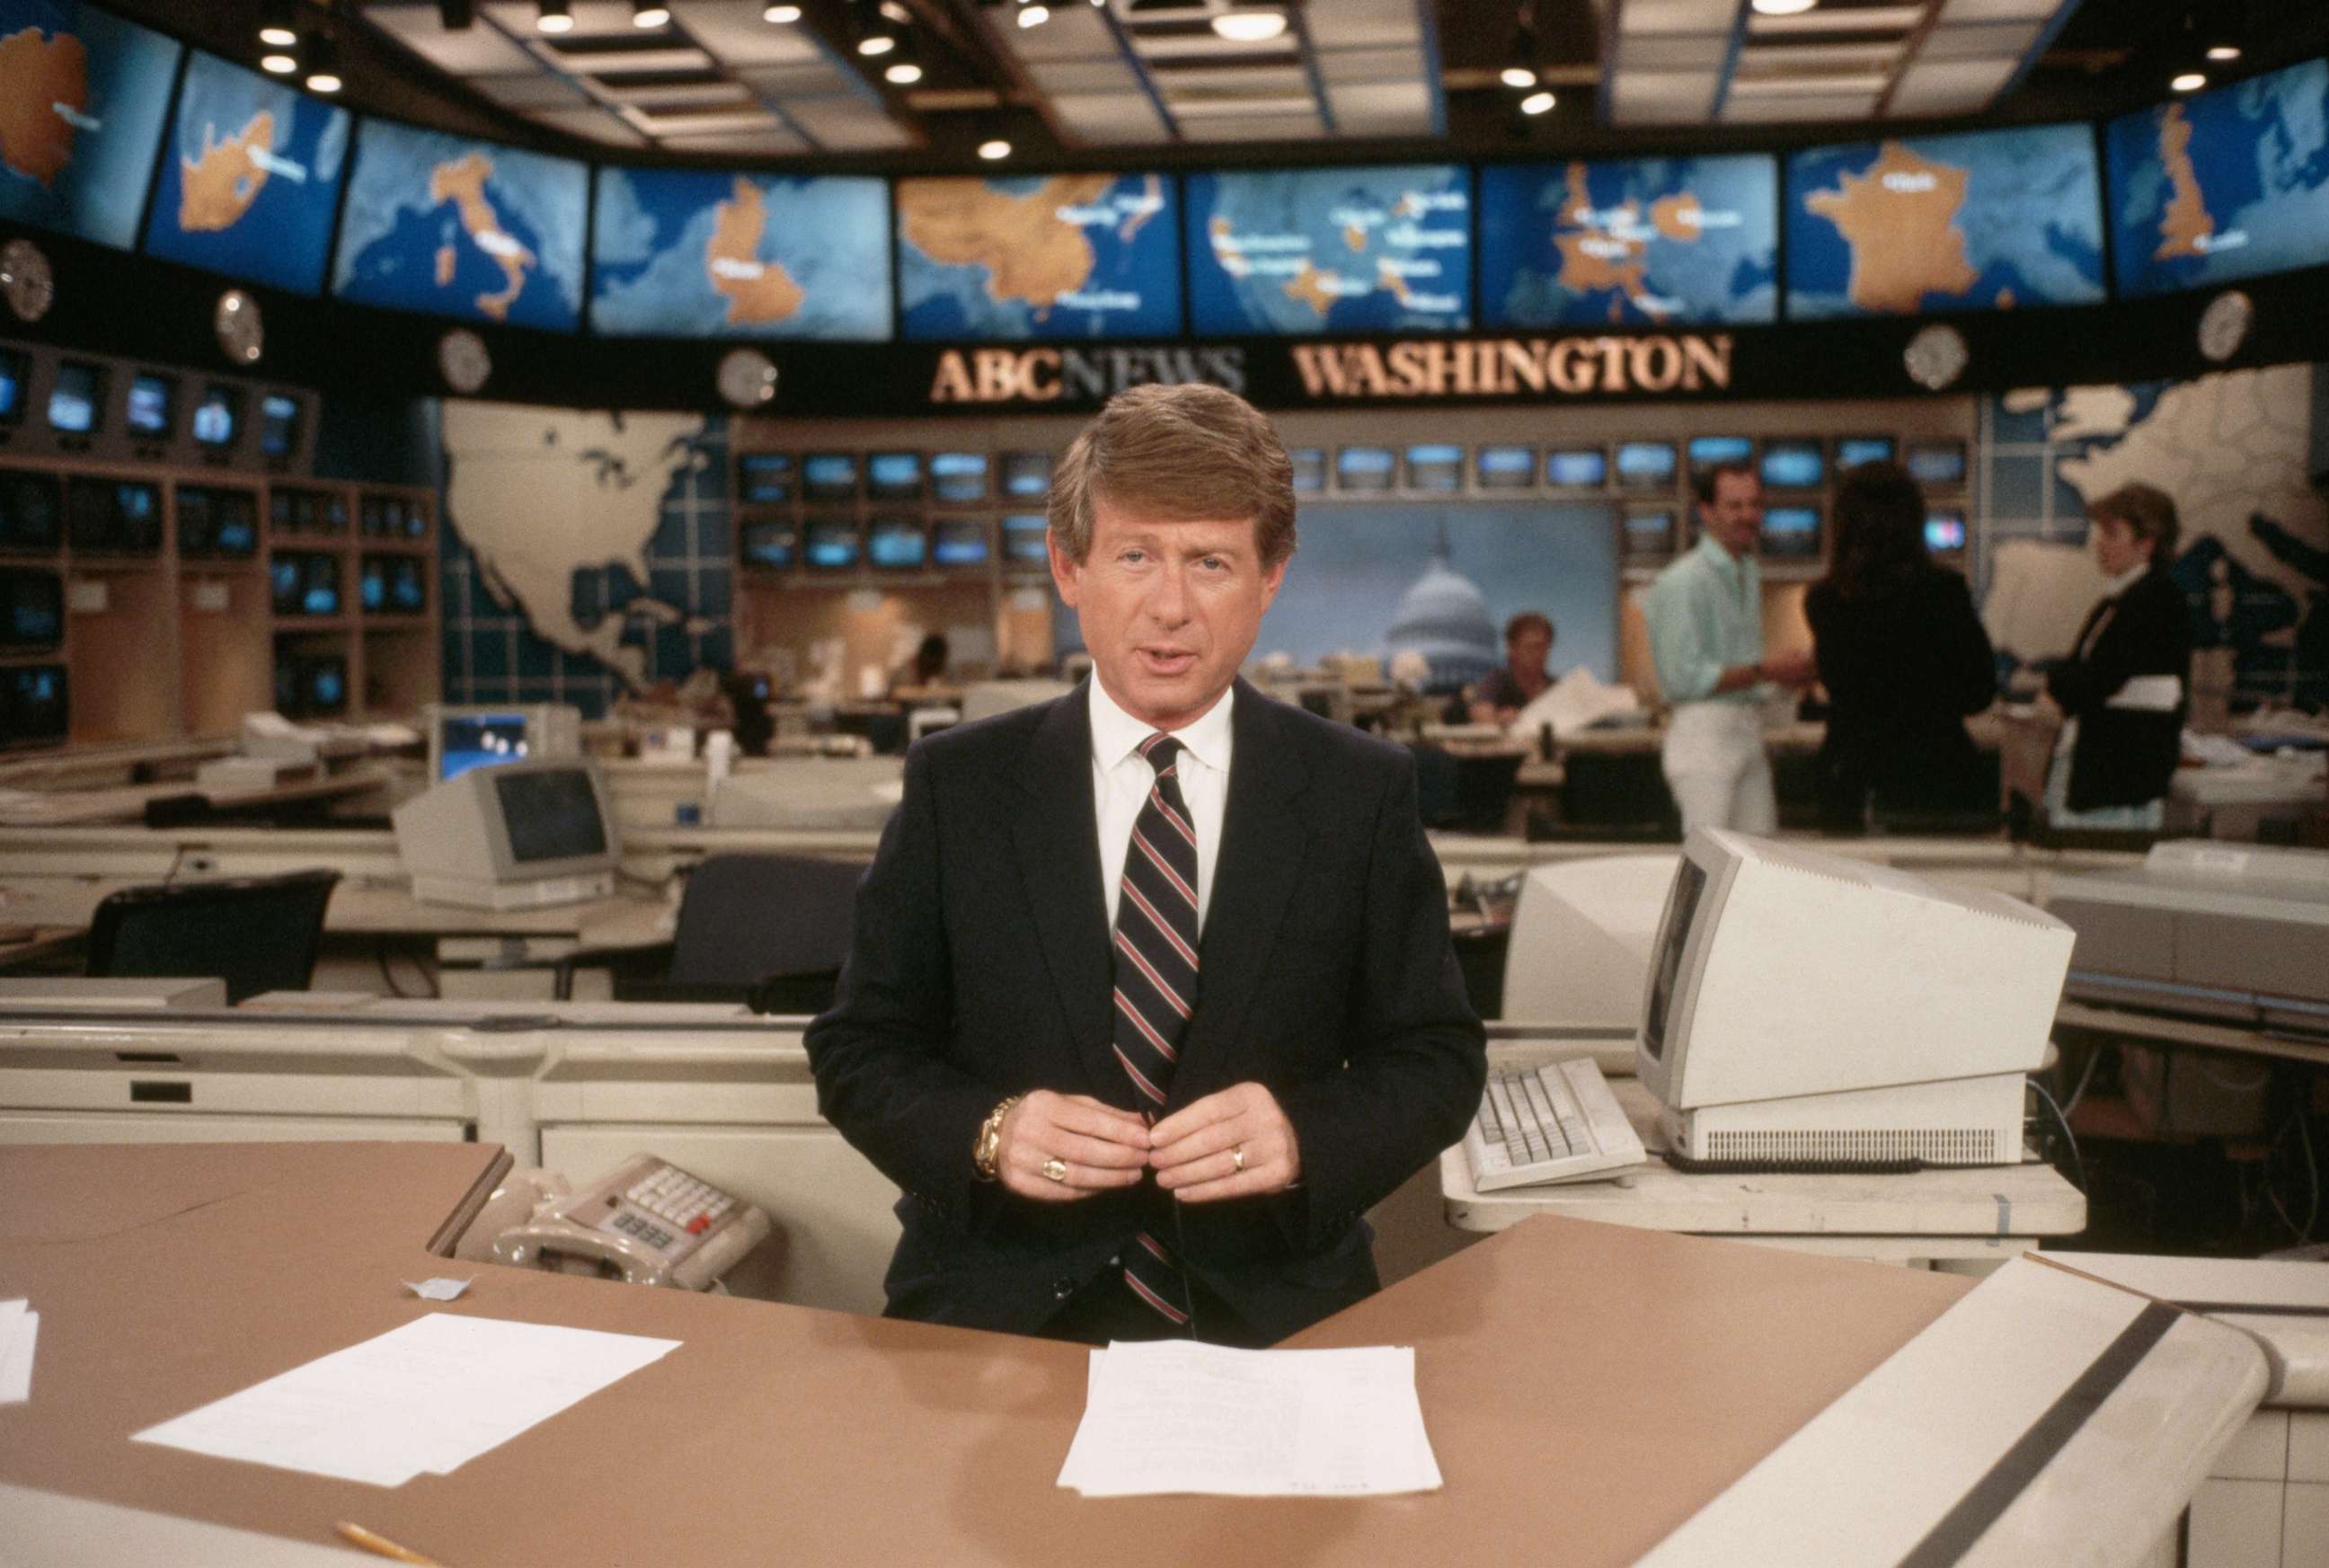 PHOTO: An undated photo shows Ted Koppel presenting ABC's "Nightline." 